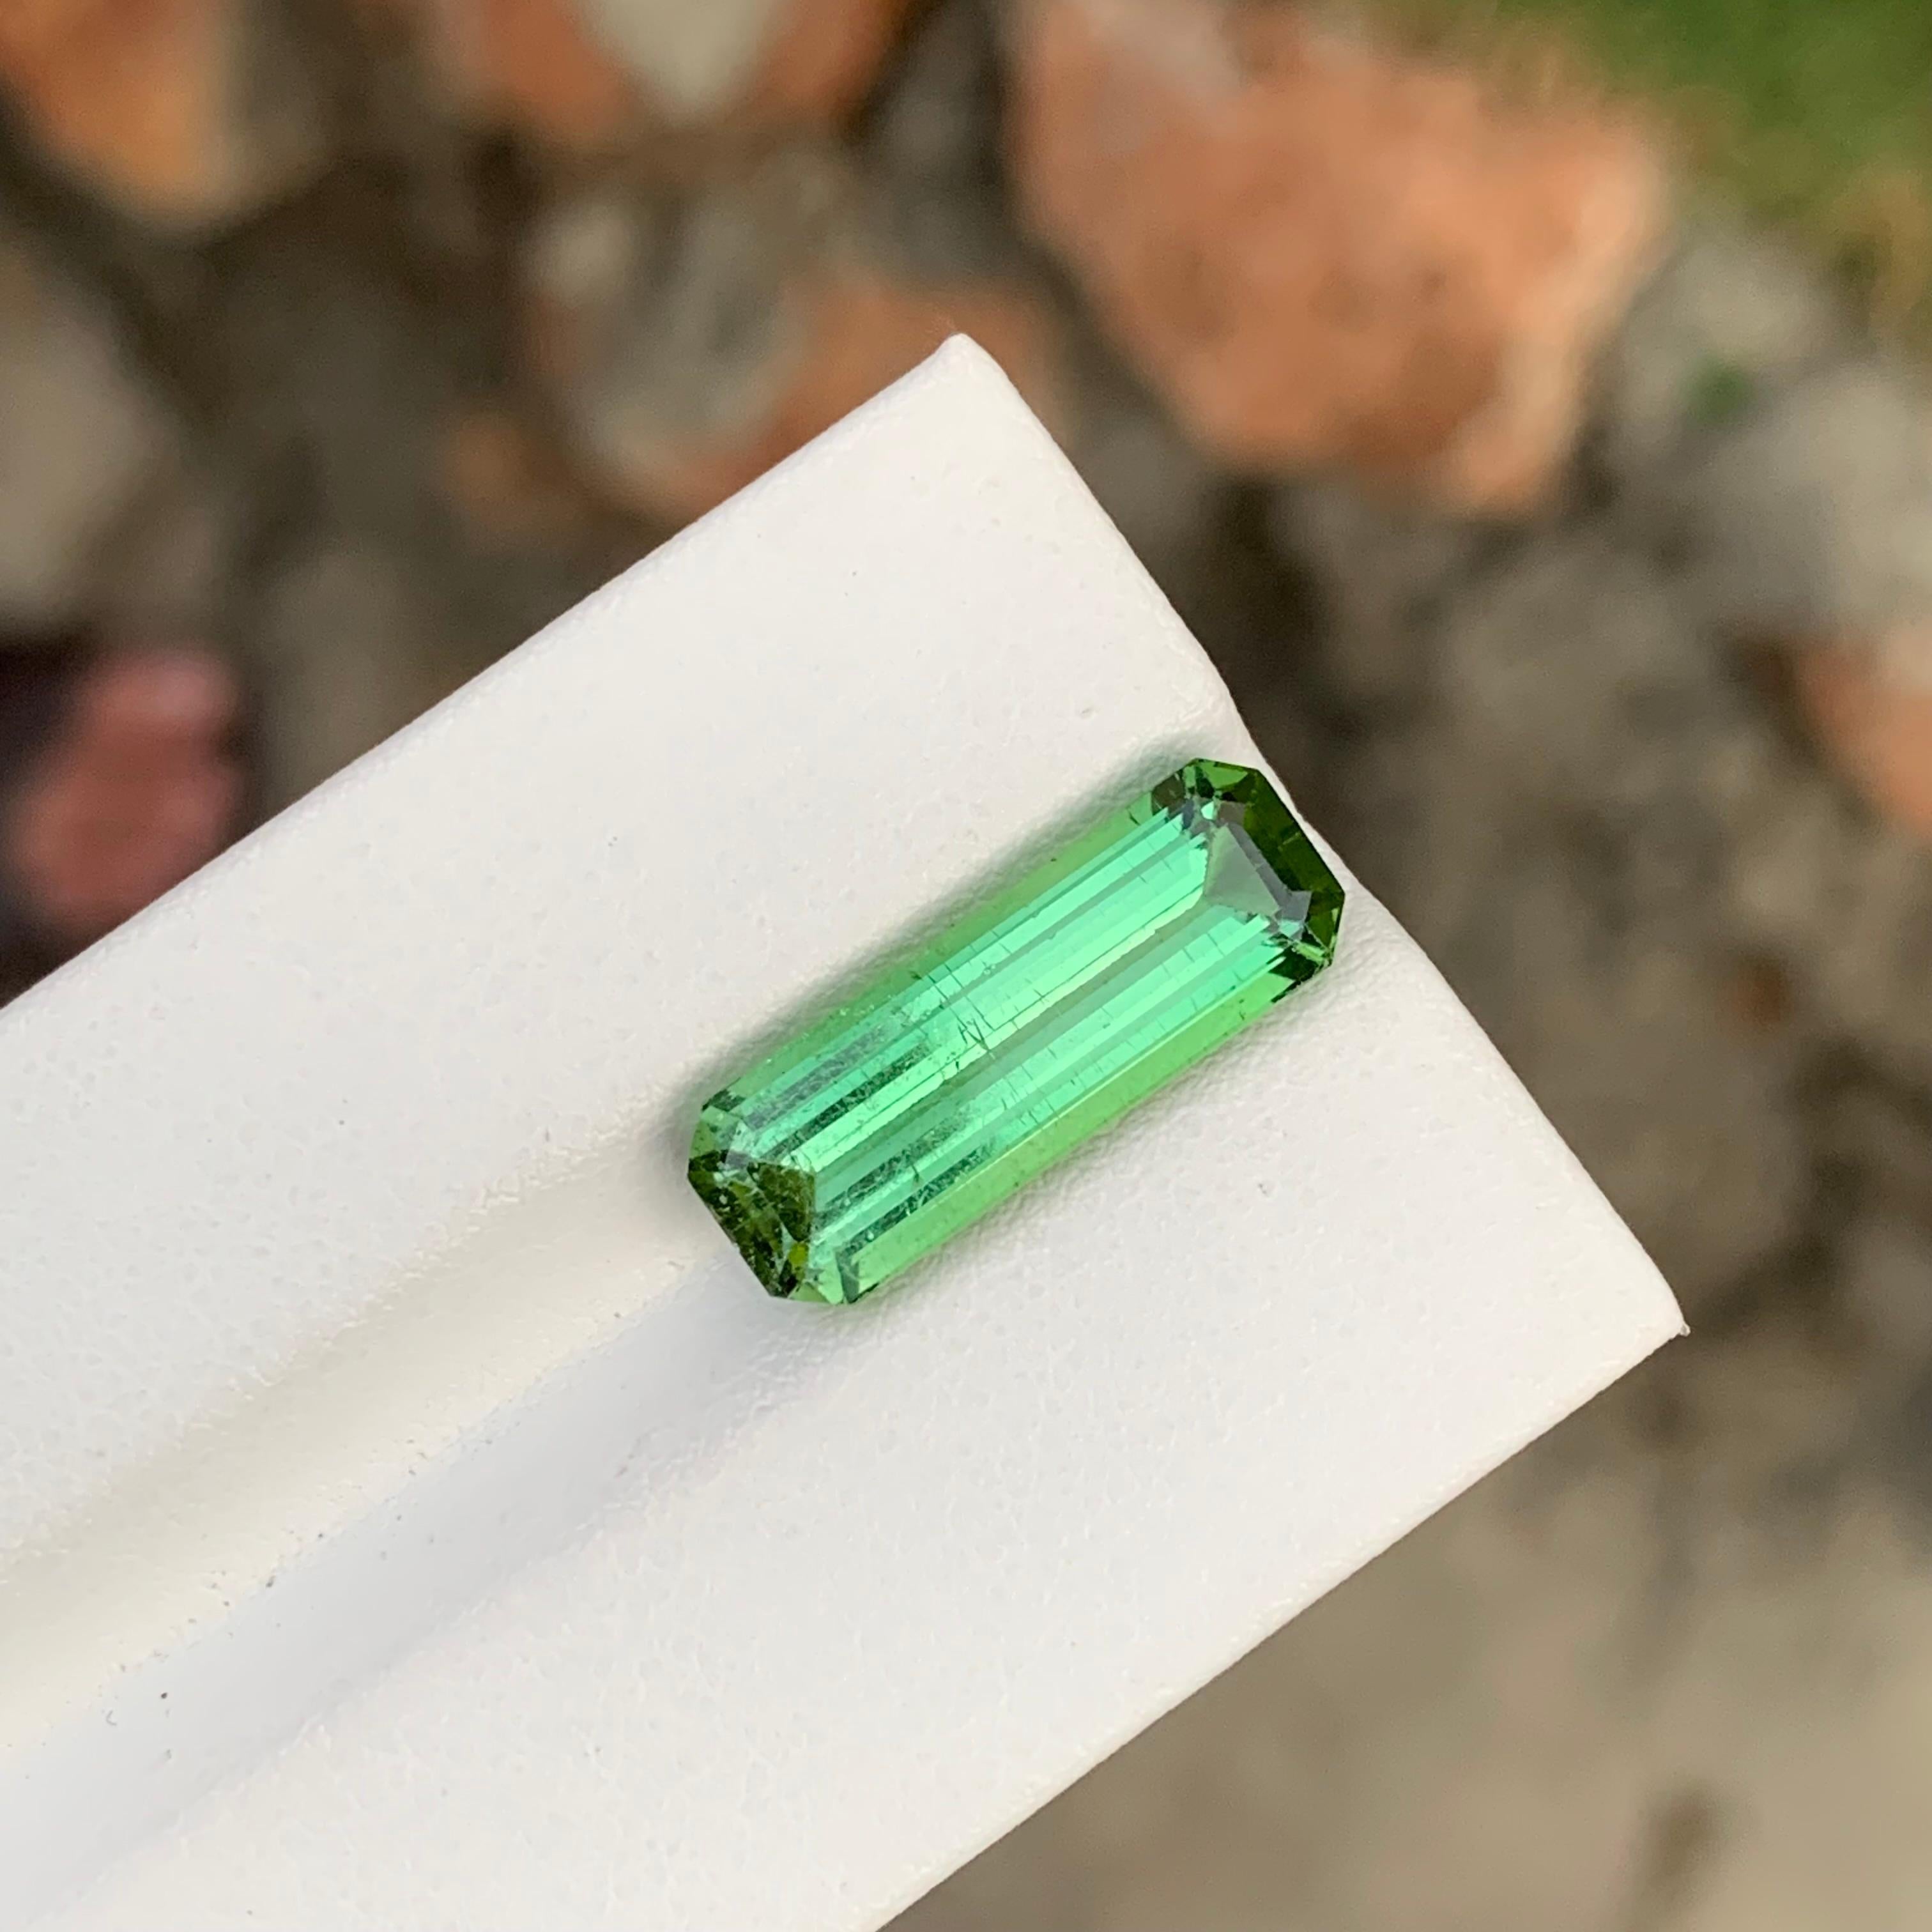 Loose Tourmaline
Weight: 7.50 Carats
Dimension: 19.2 x 6.9 x 5.9 Mm
Origin: Kunar Afghanistan
Shape: Emerald
Color: Mint Green
Treatment: Non
Certificate: On Demand

Mint green tourmaline, with its delicate hue reminiscent of fresh spring foliage,